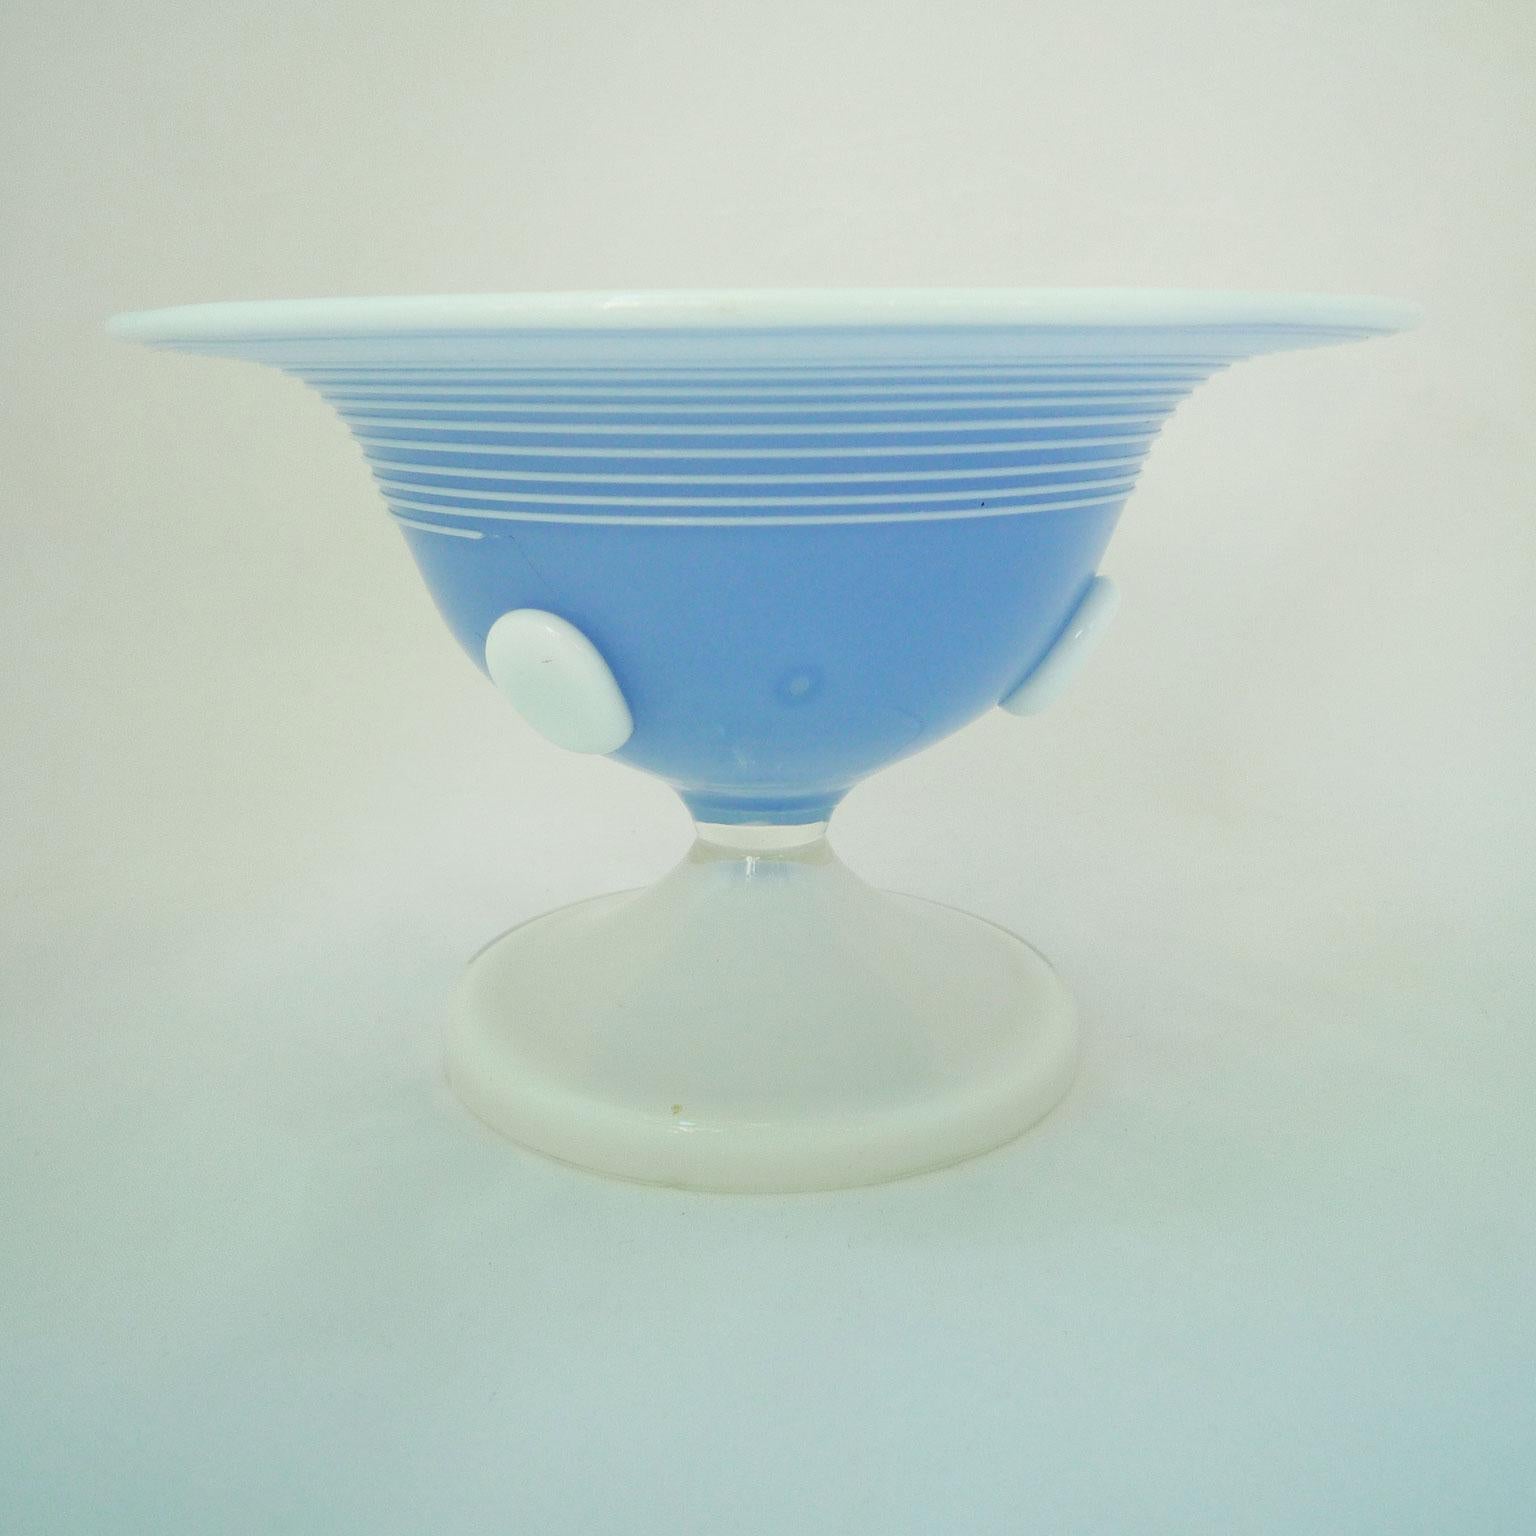 Hand-Crafted Confectionery Bowl Series Tango, Loetz, Powolny, Flashed Glass, 1920s, Art Deco